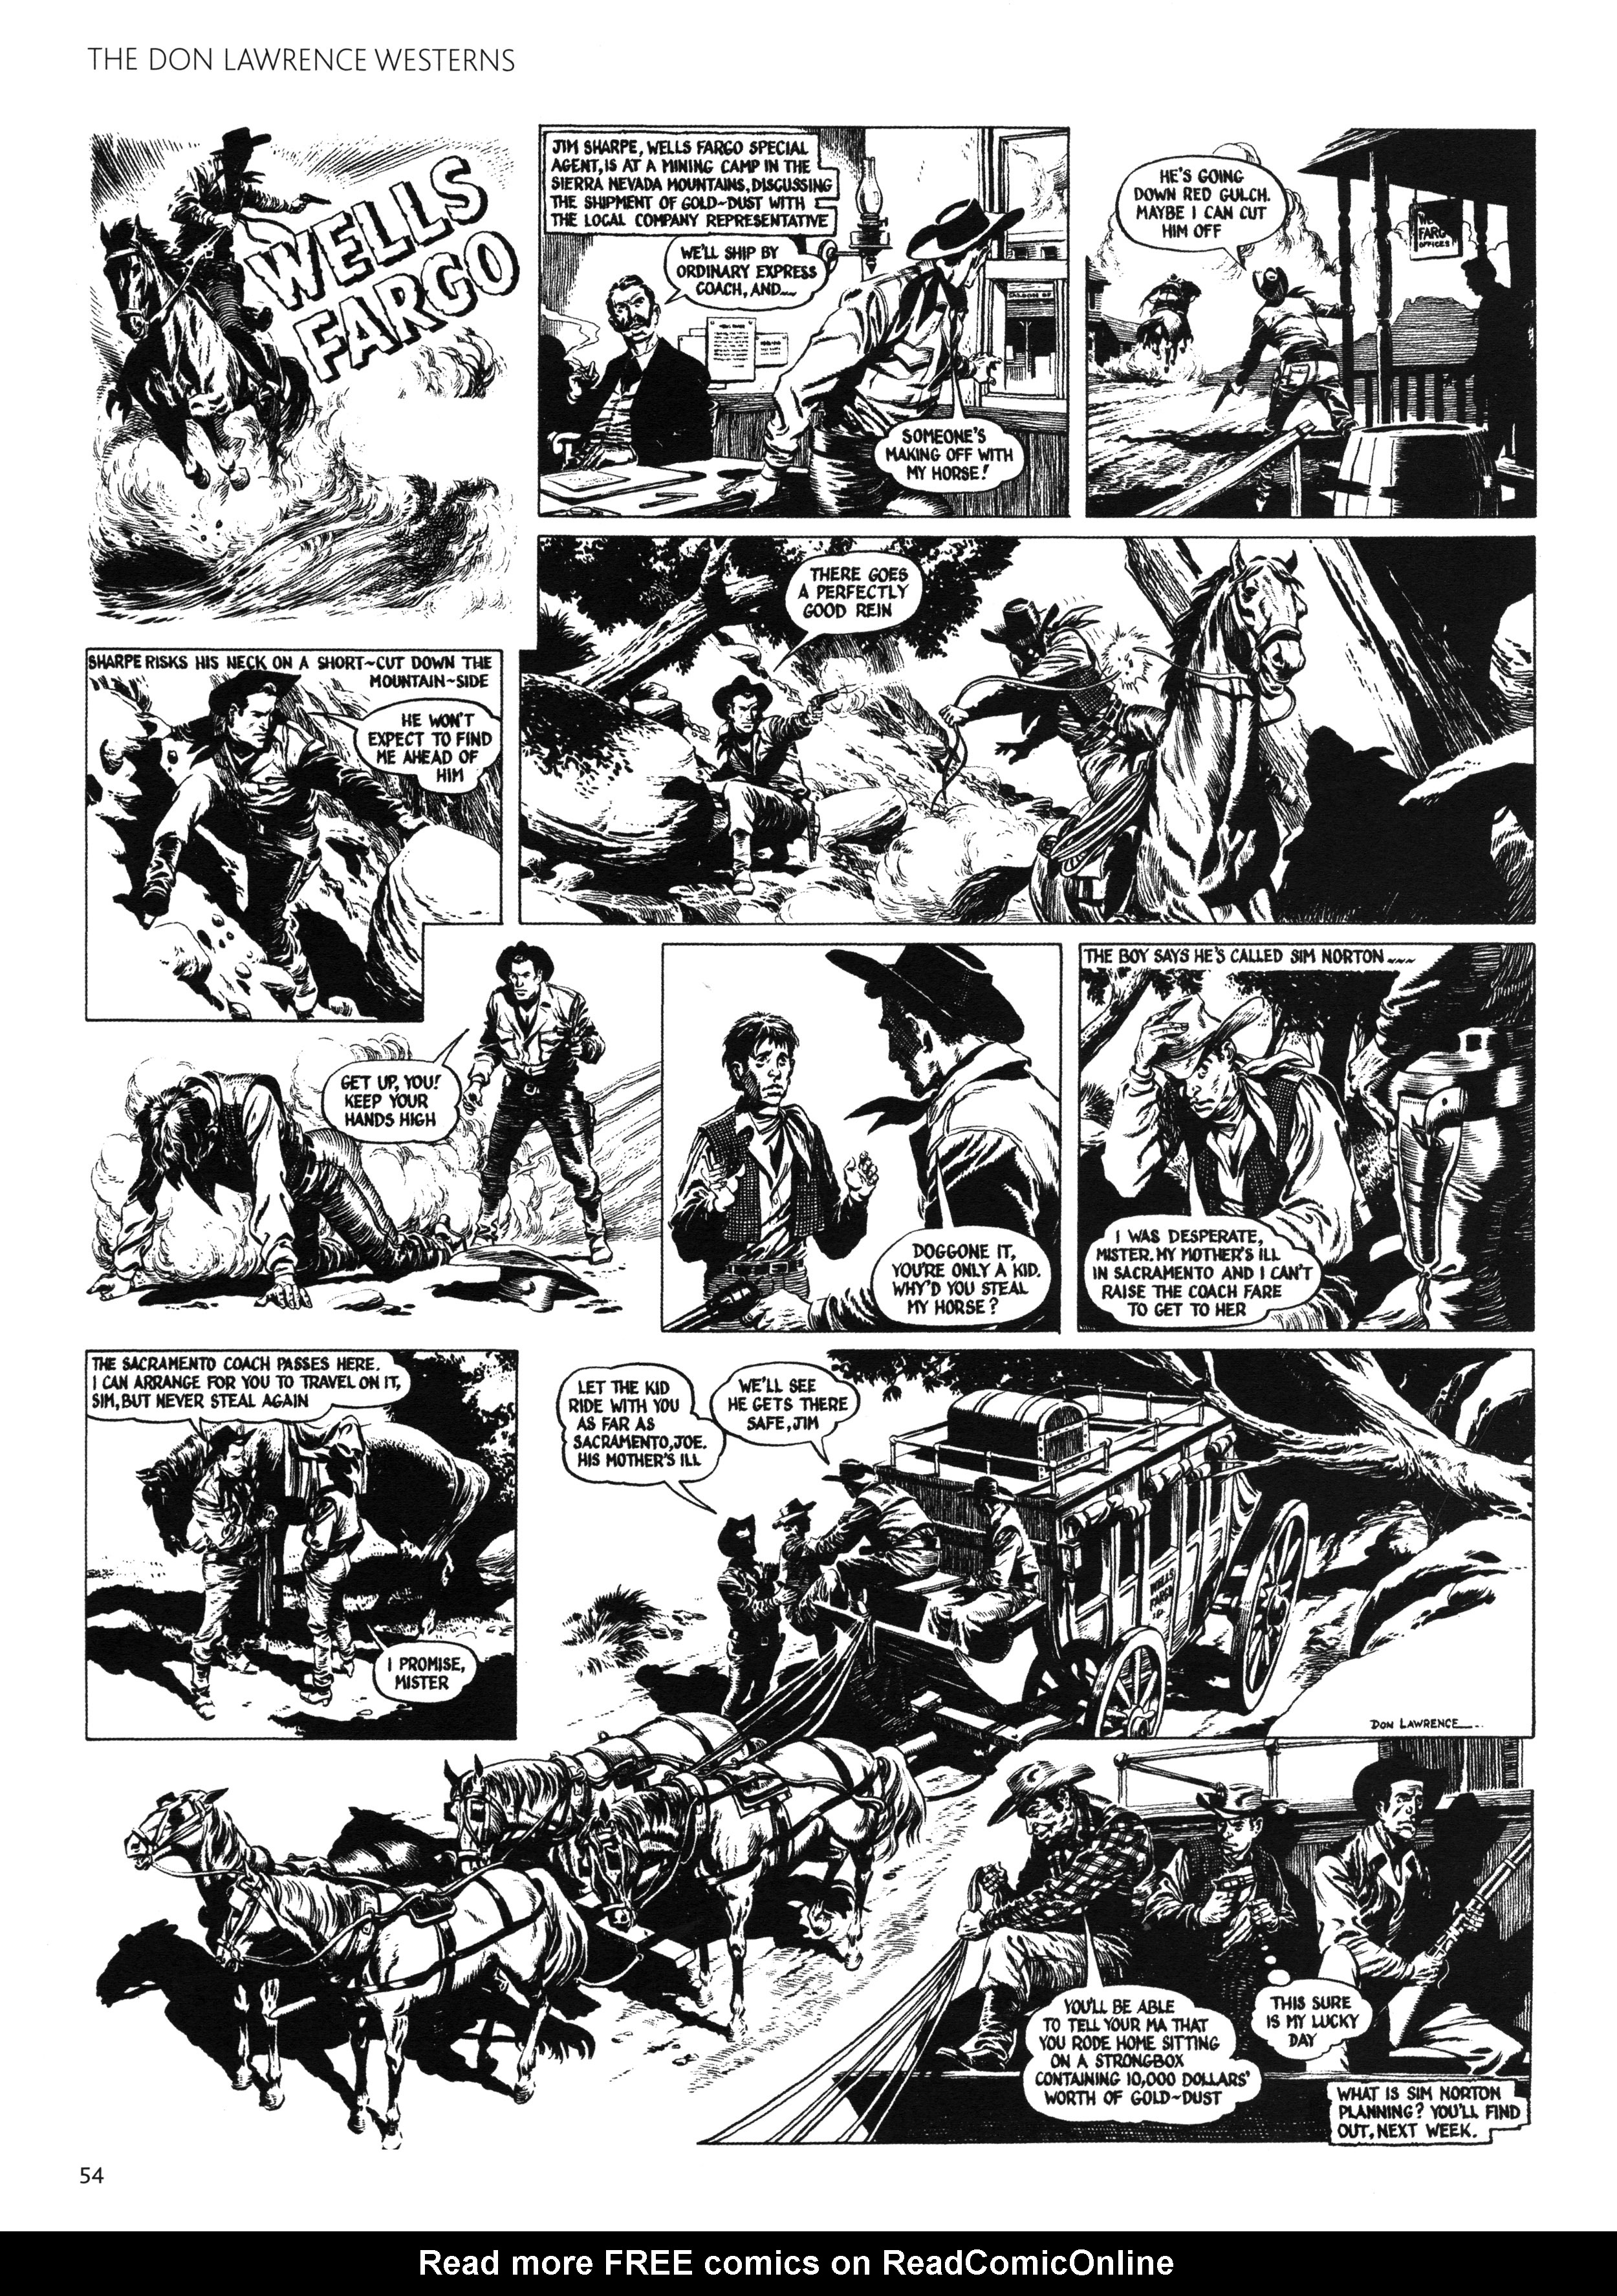 Read online Don Lawrence Westerns comic -  Issue # TPB (Part 1) - 58